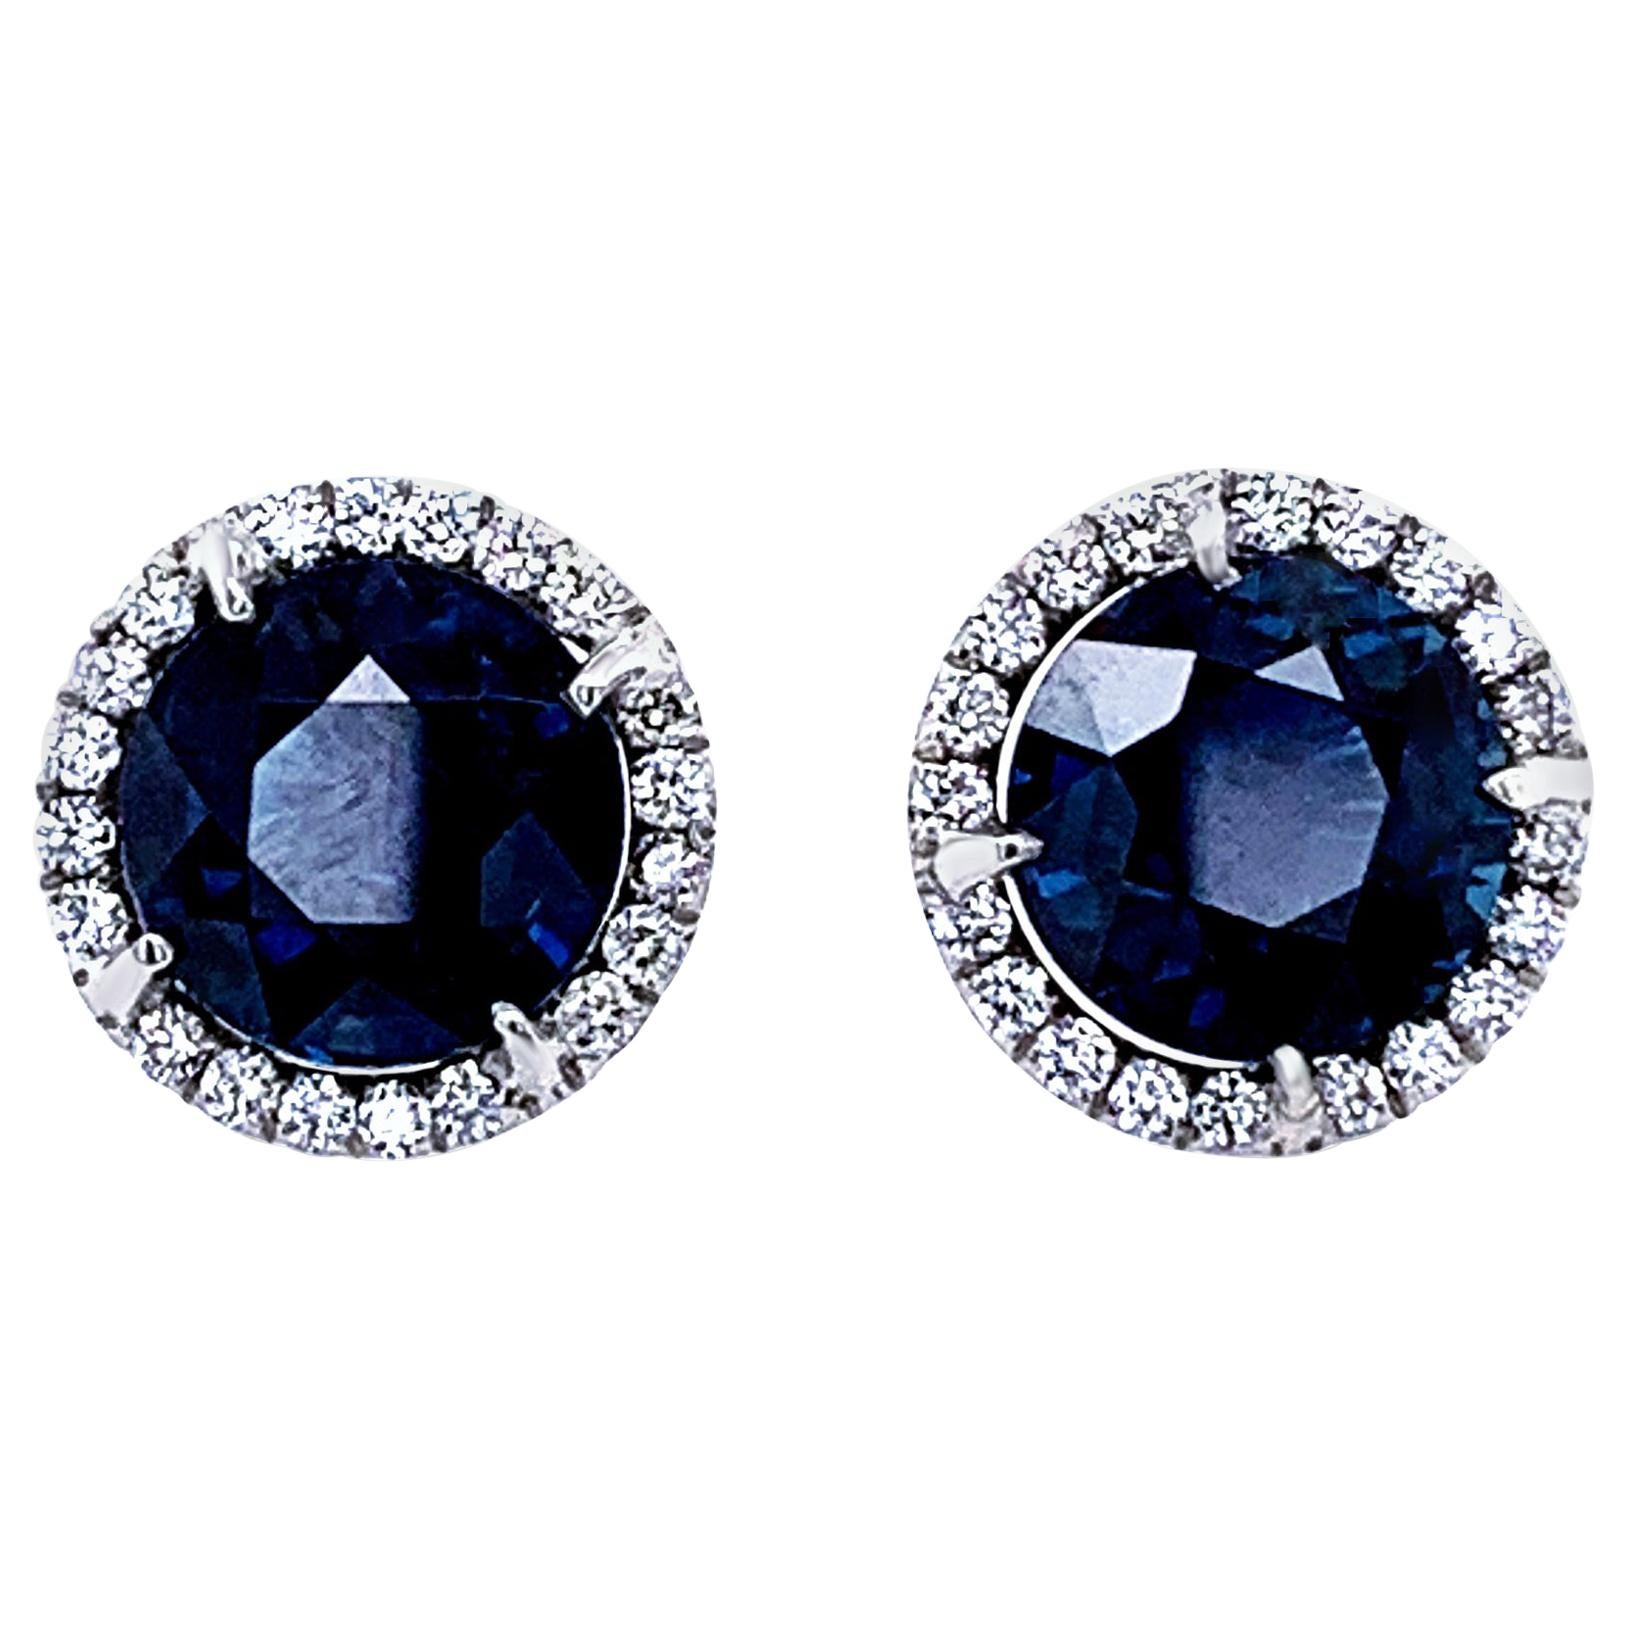 4.15 Carat 'Total Weight' Sapphire and Diamond Halo Stud Earrings